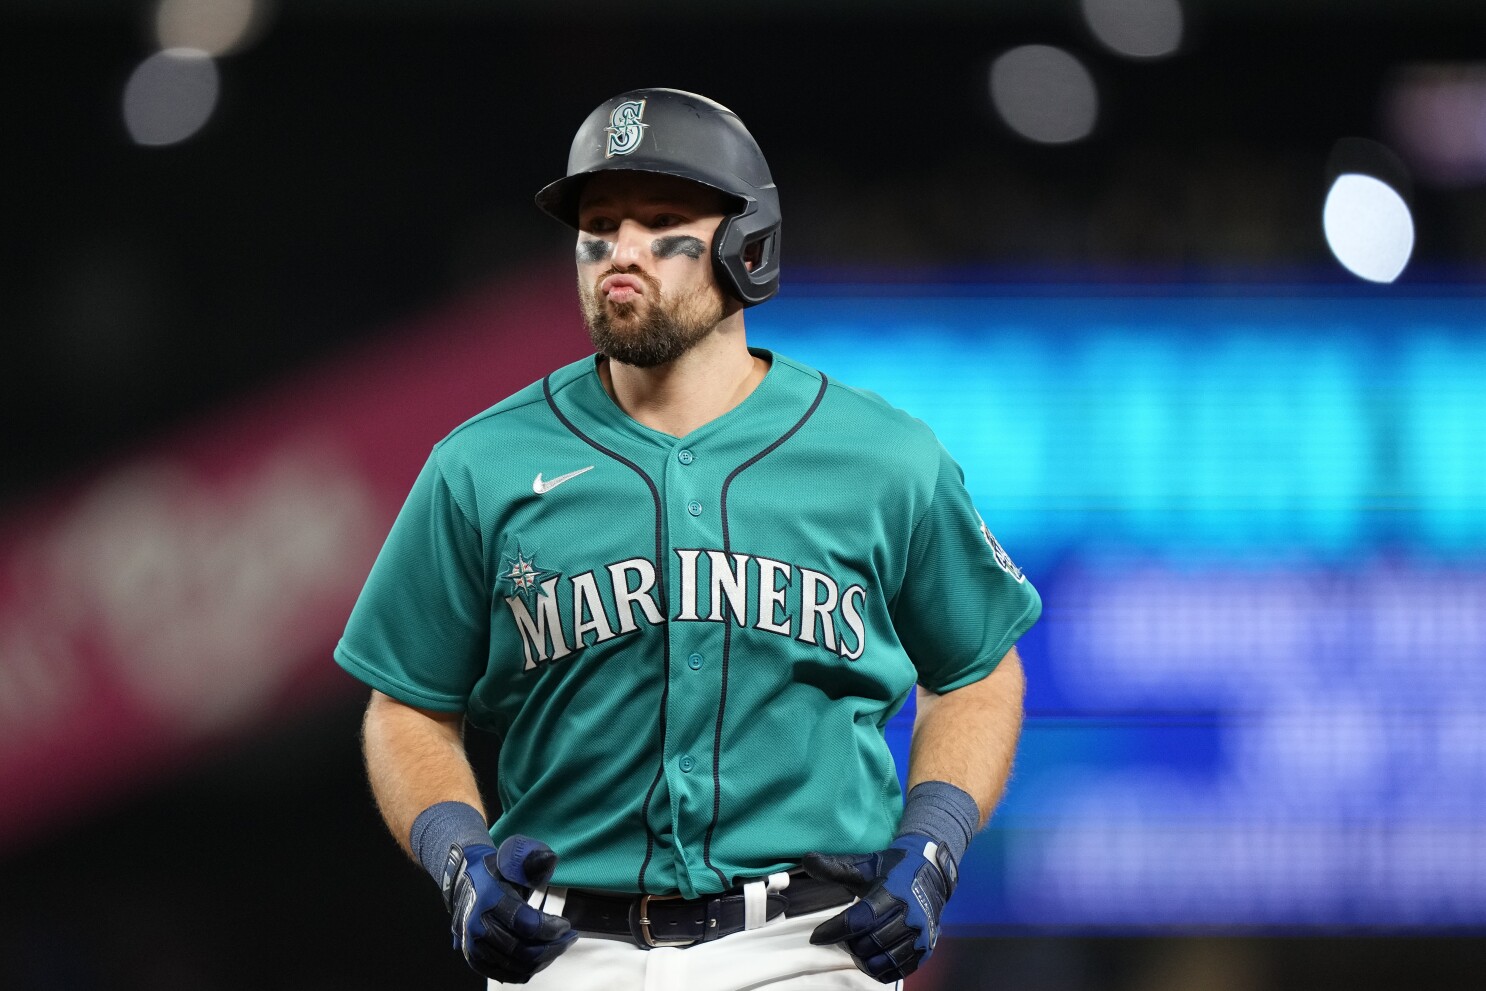 Mariners Cal Raleigh apologizes for comments after Seattle